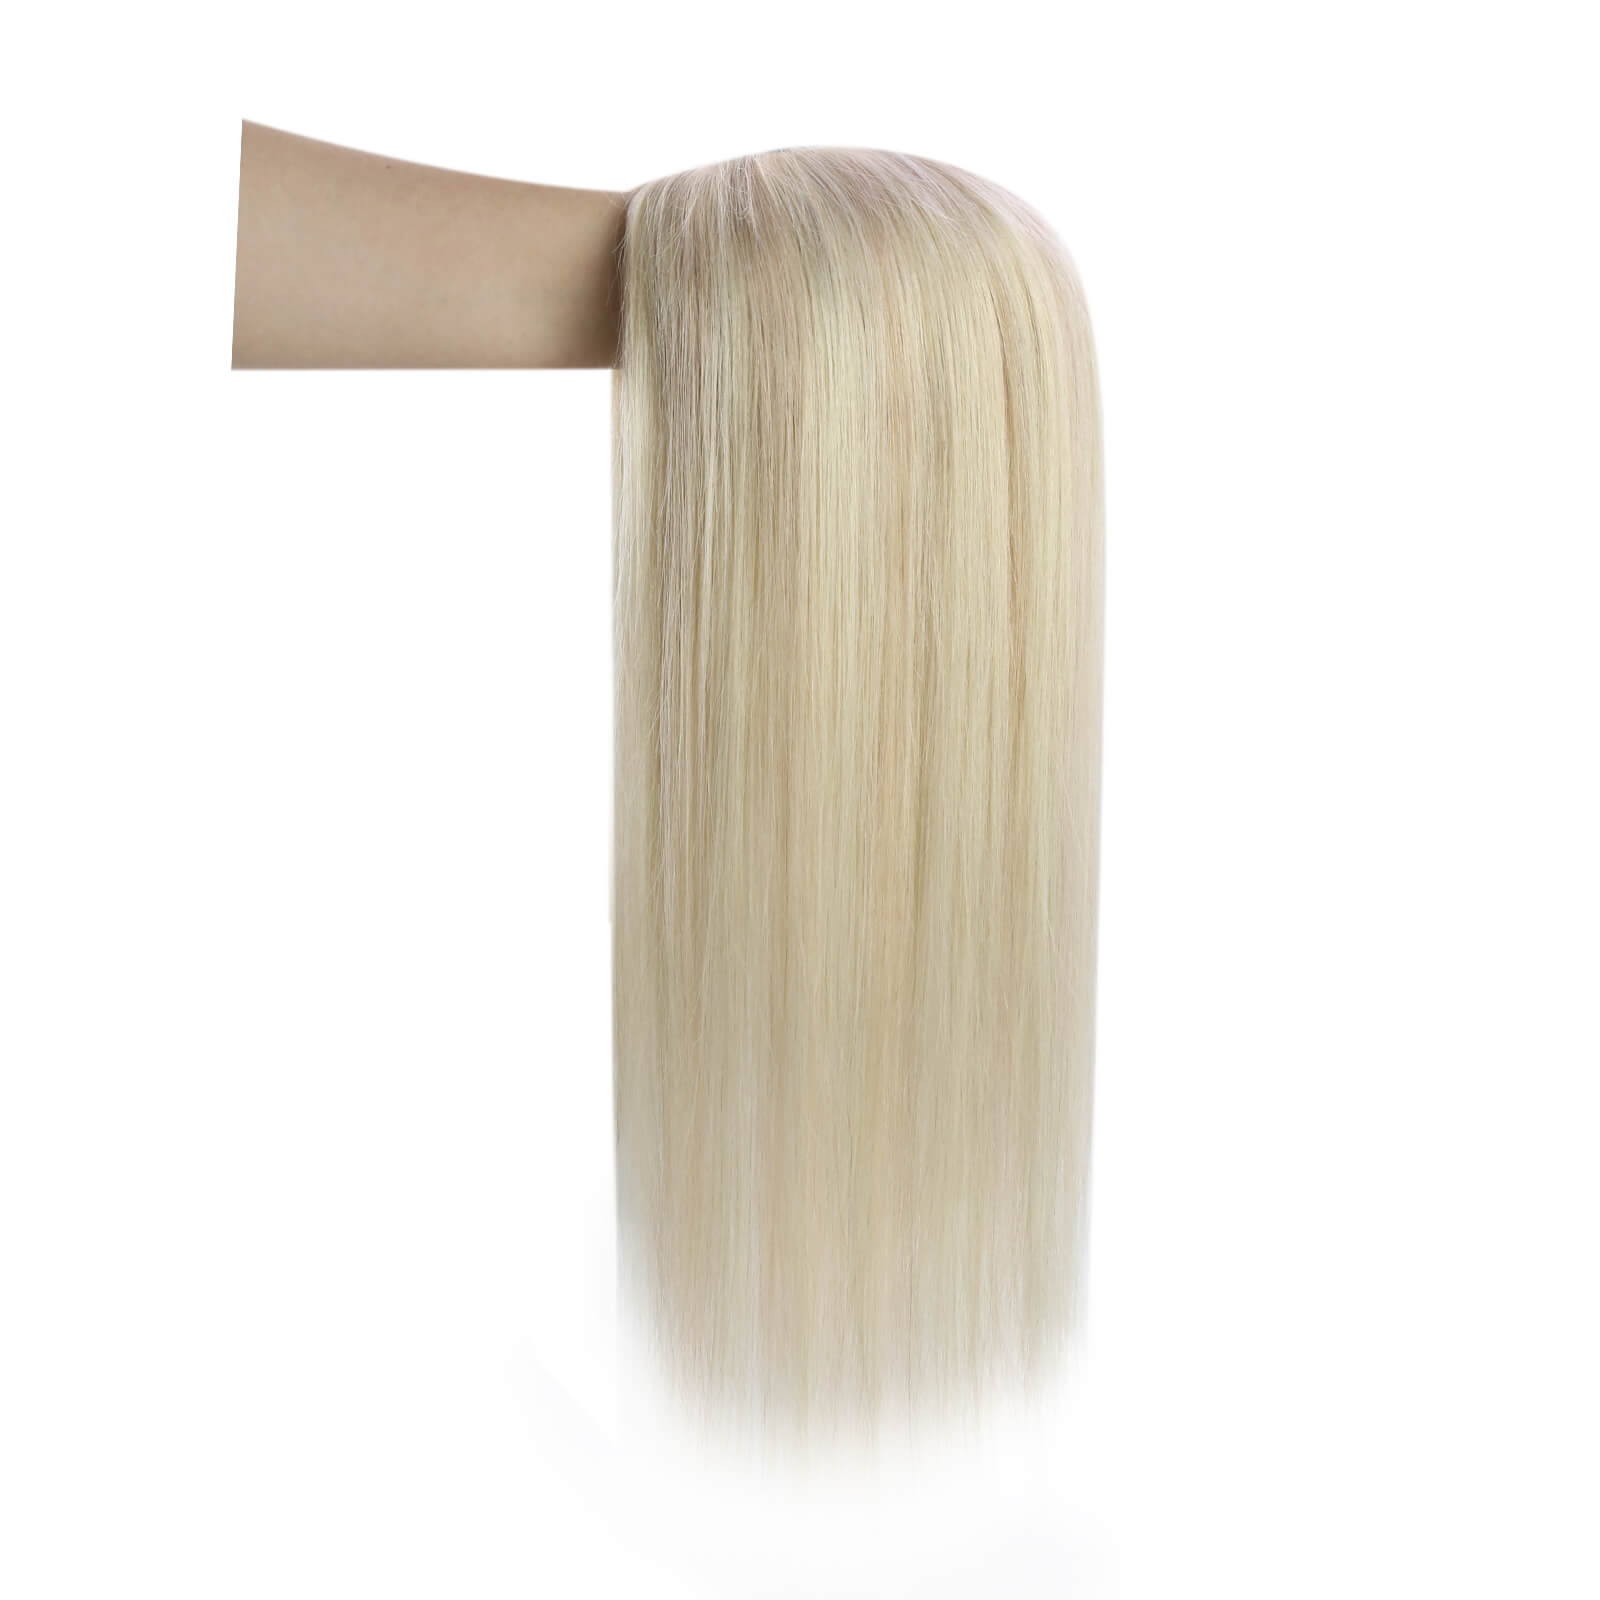 [Density Upgrade 150%] Lace Base Human Hair Topper Without Bangs For Loss Hair Highlighted Color Blonde Hair 18/613